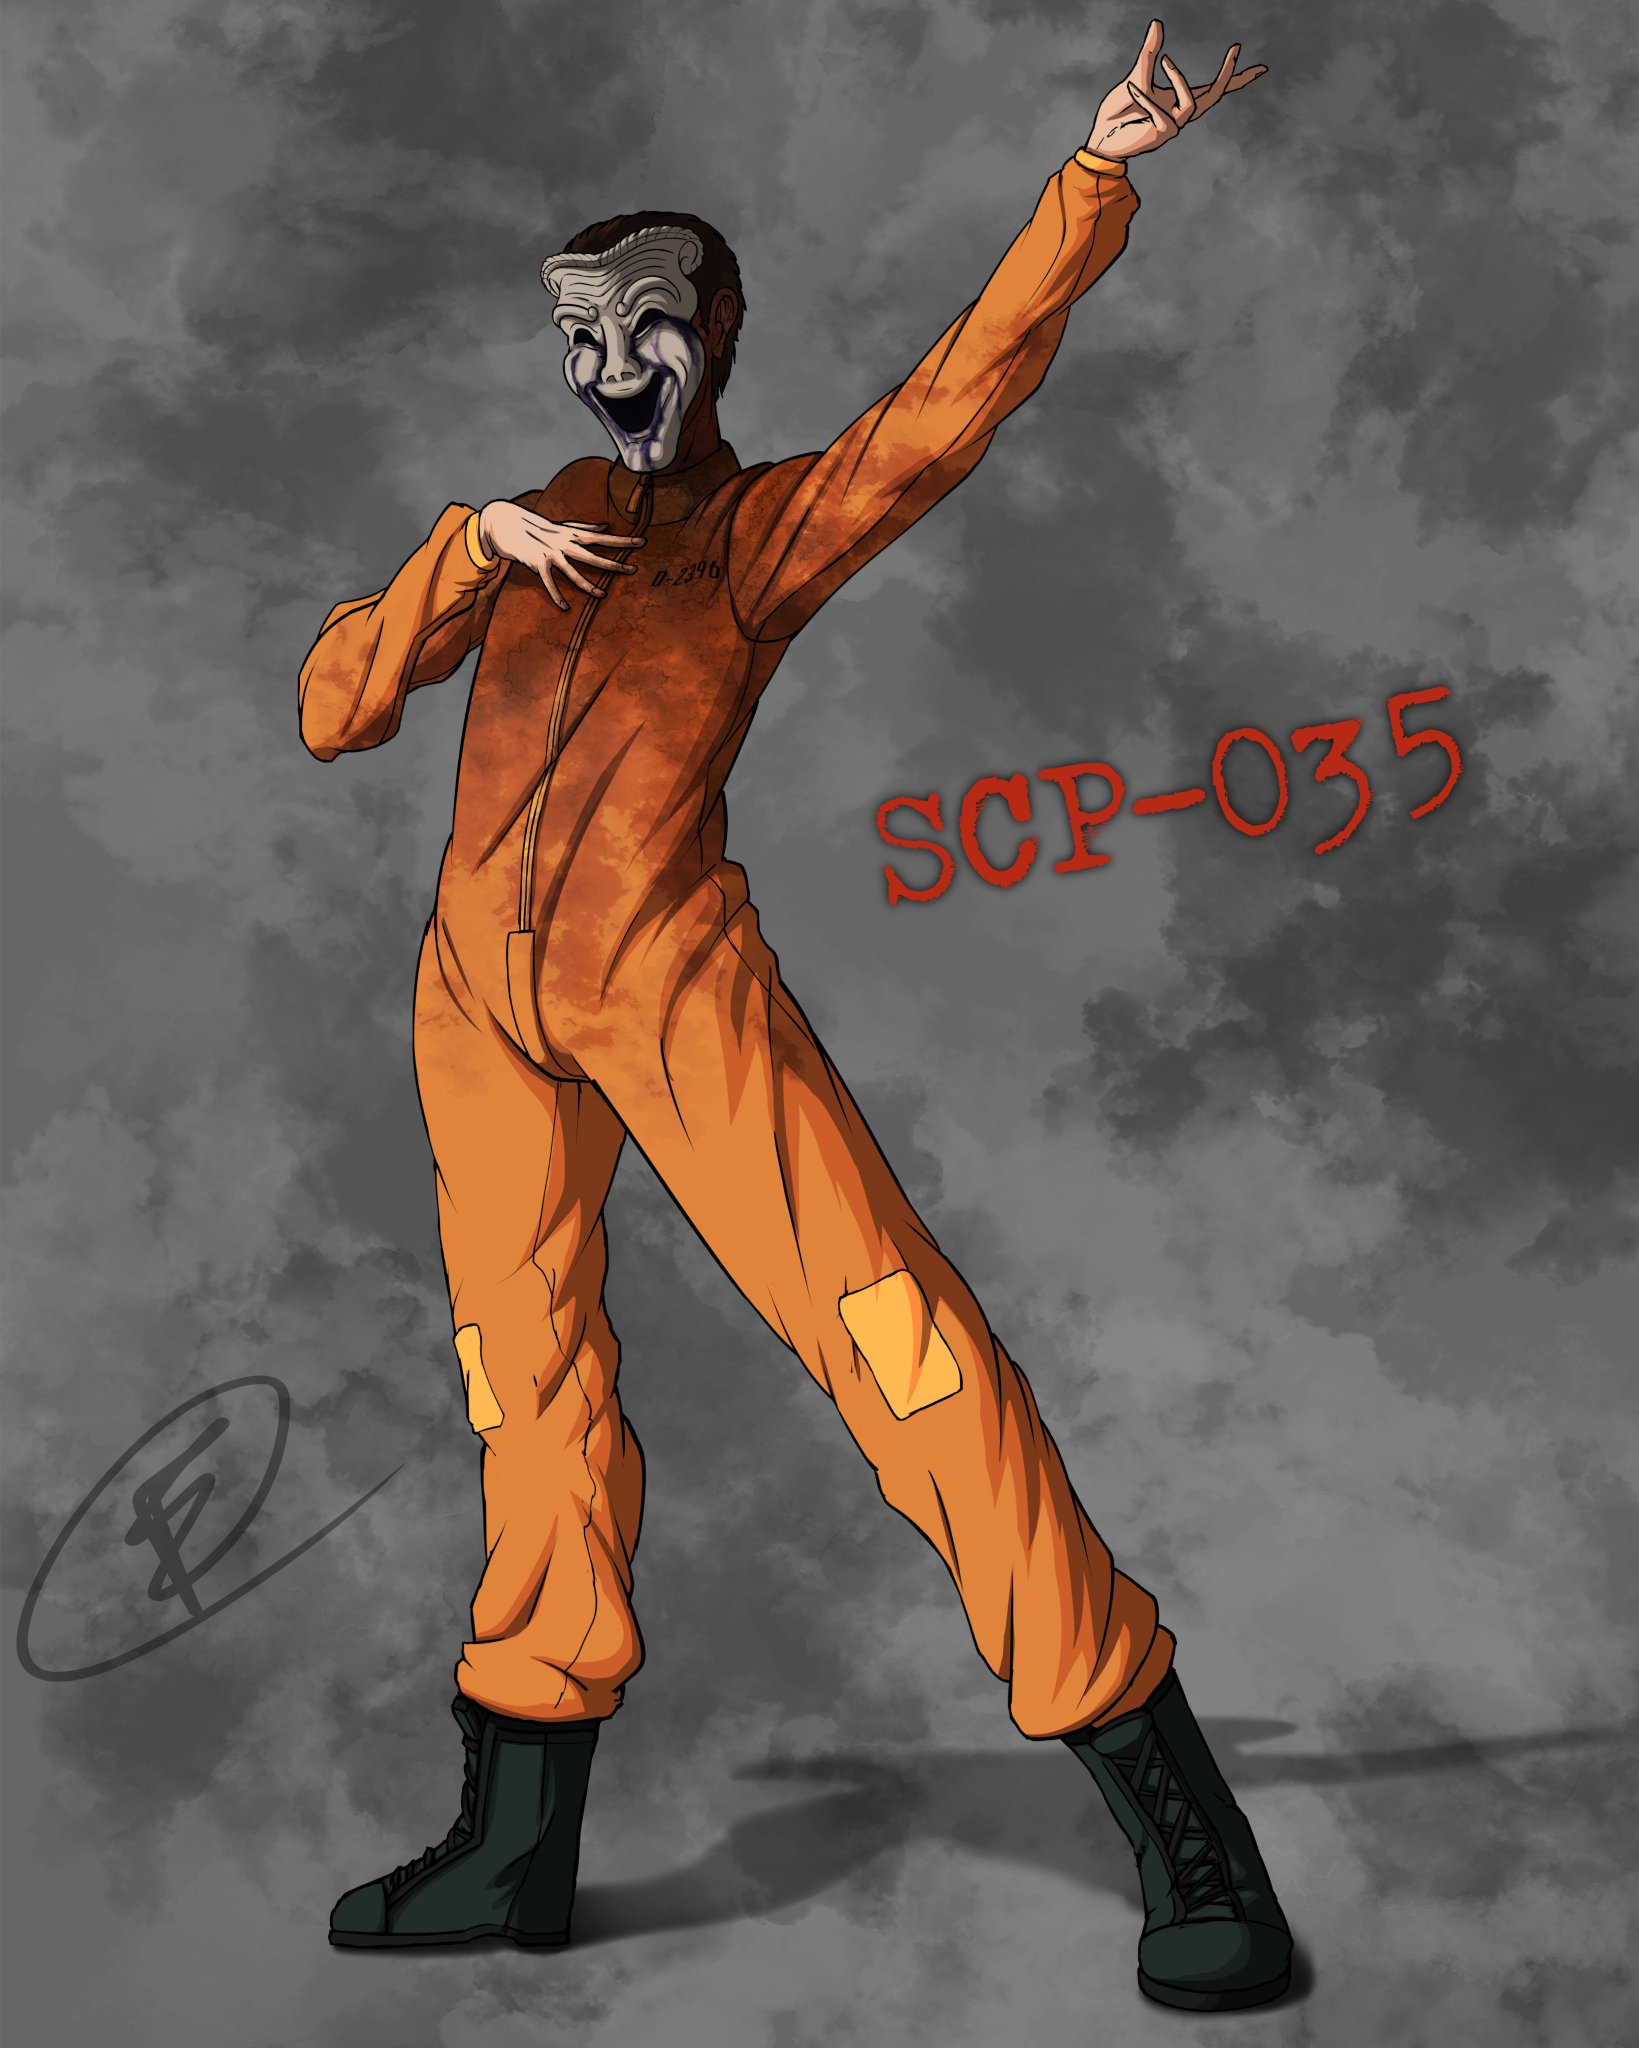 SCP-035 